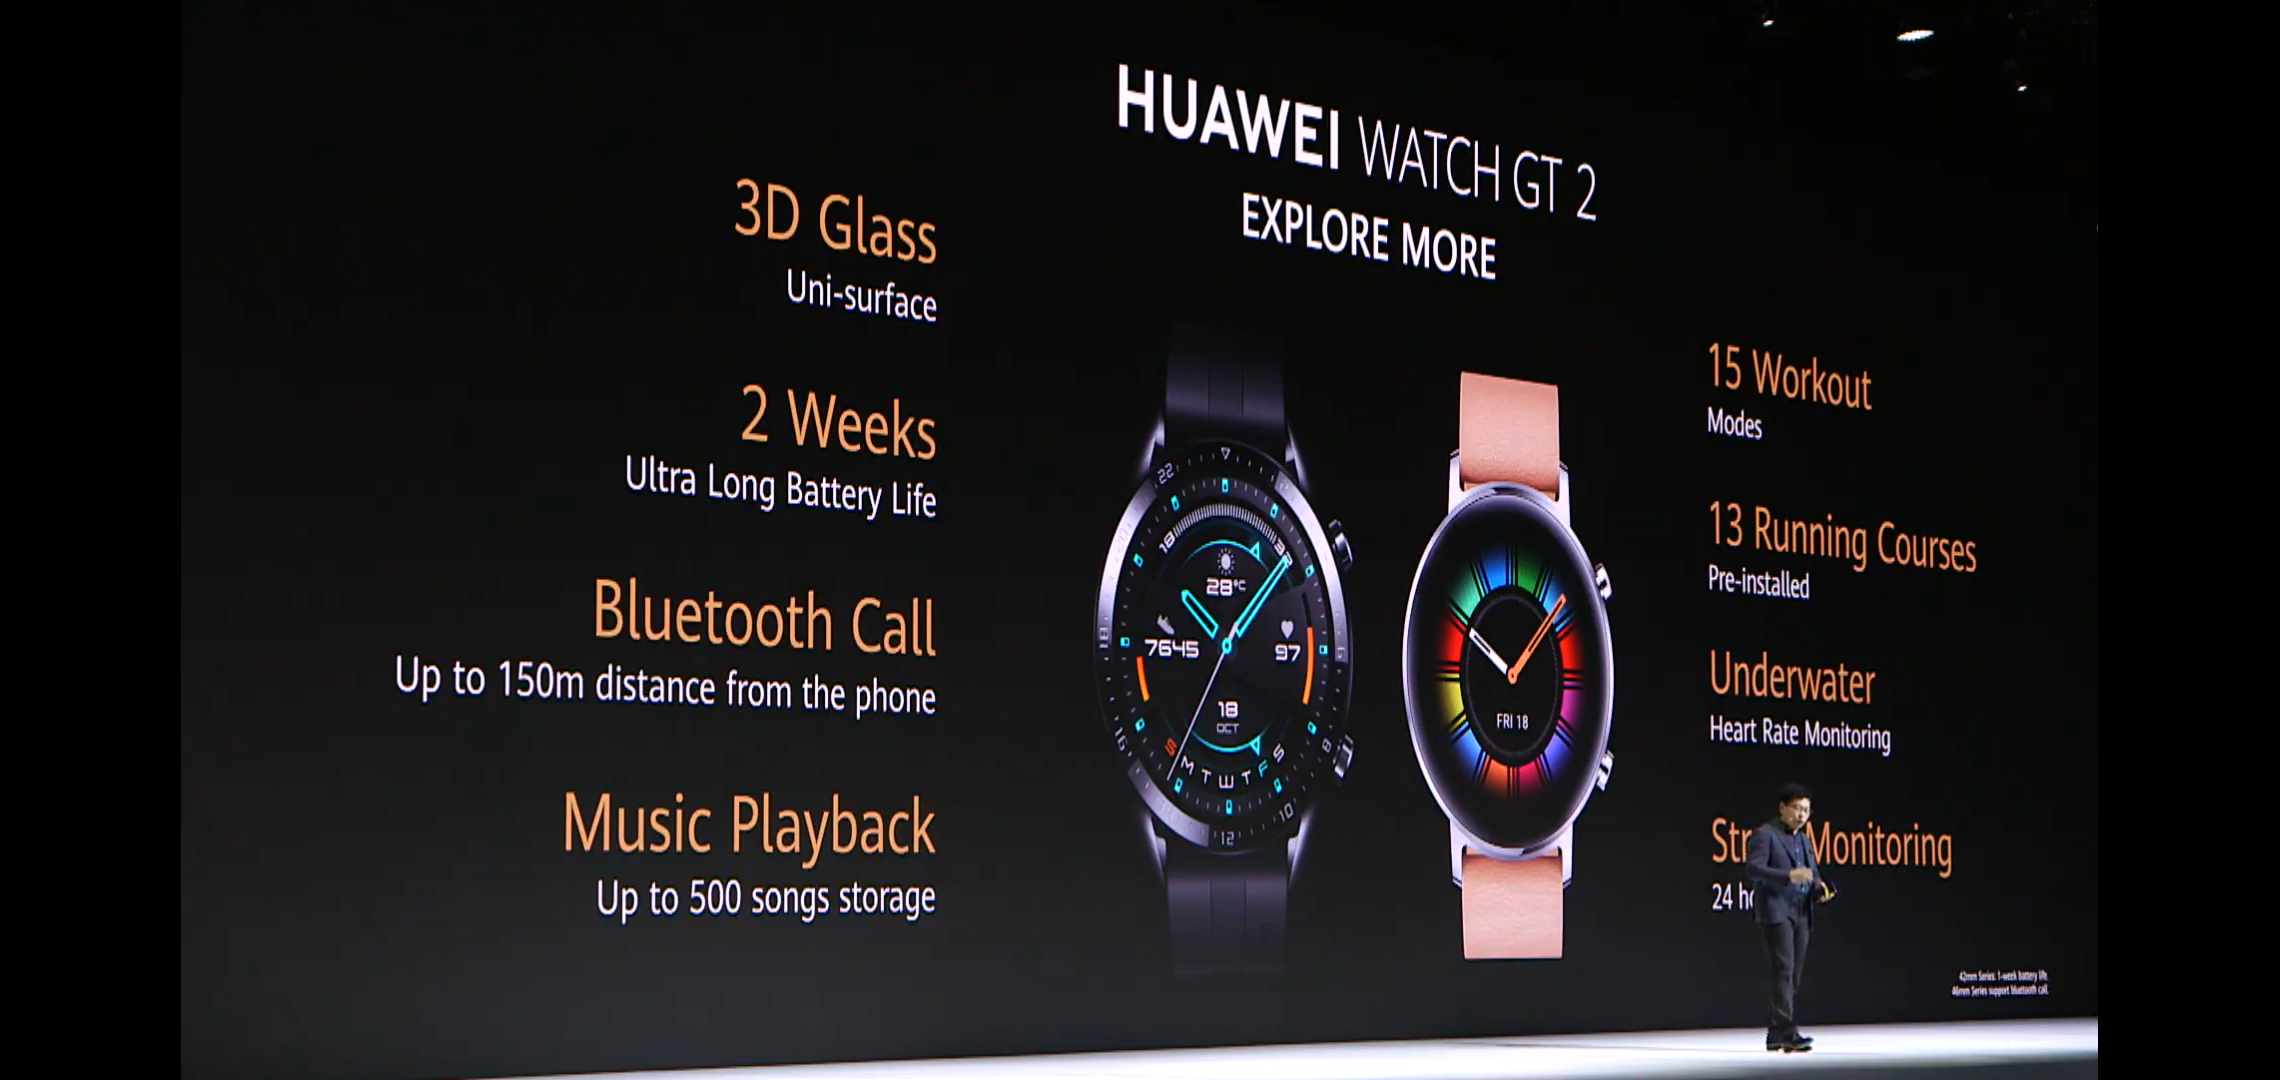 Huawei Watch GT 2 unveiled with Always-On display, weeks battery life and more! - Gizmochina